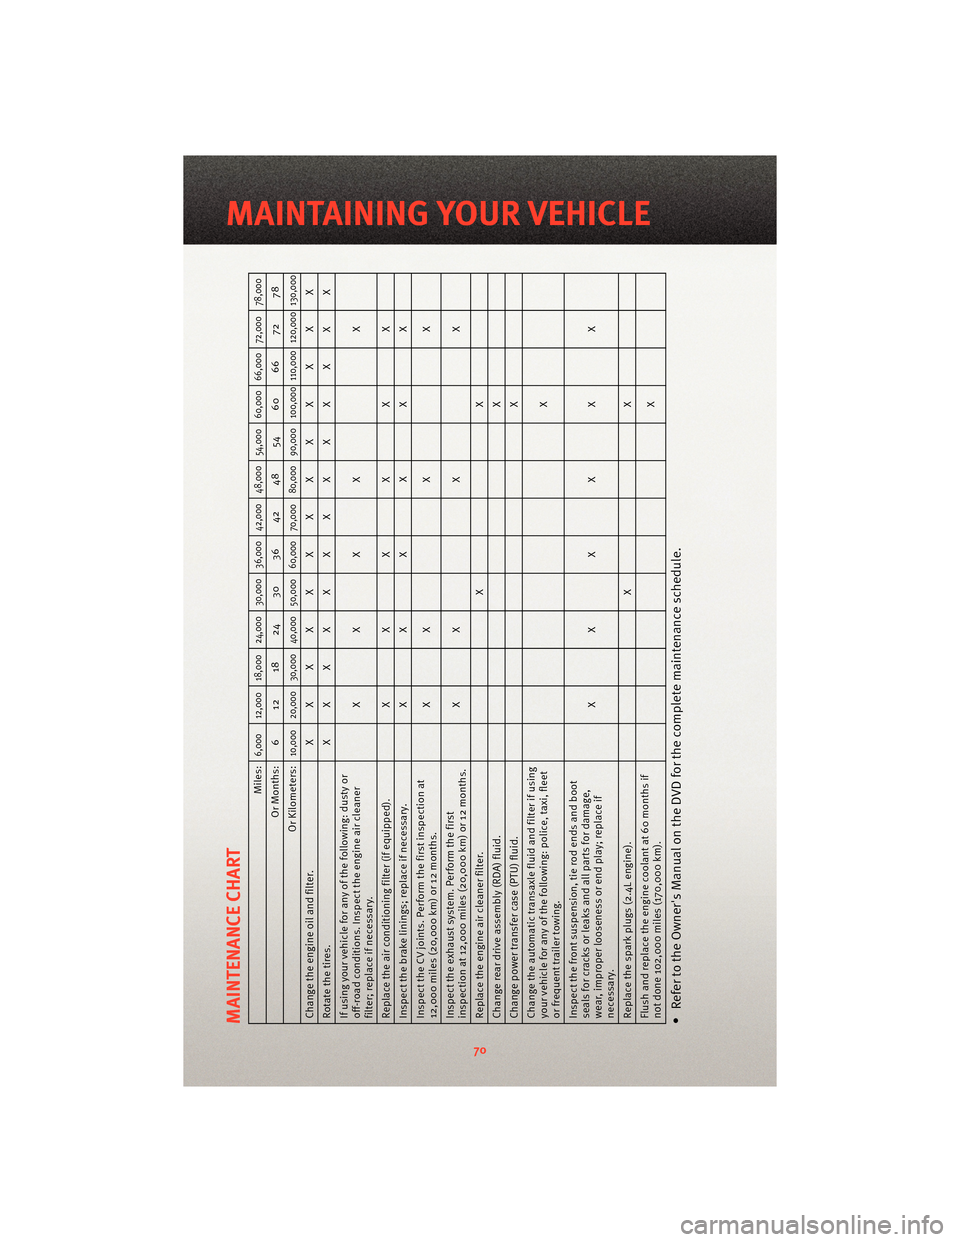 DODGE JOURNEY 2010 1.G User Guide MAINTENANCE CHART
Miles:
6,000 12,000 18,000 24,000 30,000 36,000 42,000 48,000 54,000 60,000 66,000 72,000 78,000
Or Months: 6 12 18 24 30 36 42 48 54 60 66 72 78
Or Kilometers:
10,000 20,000 30,000 